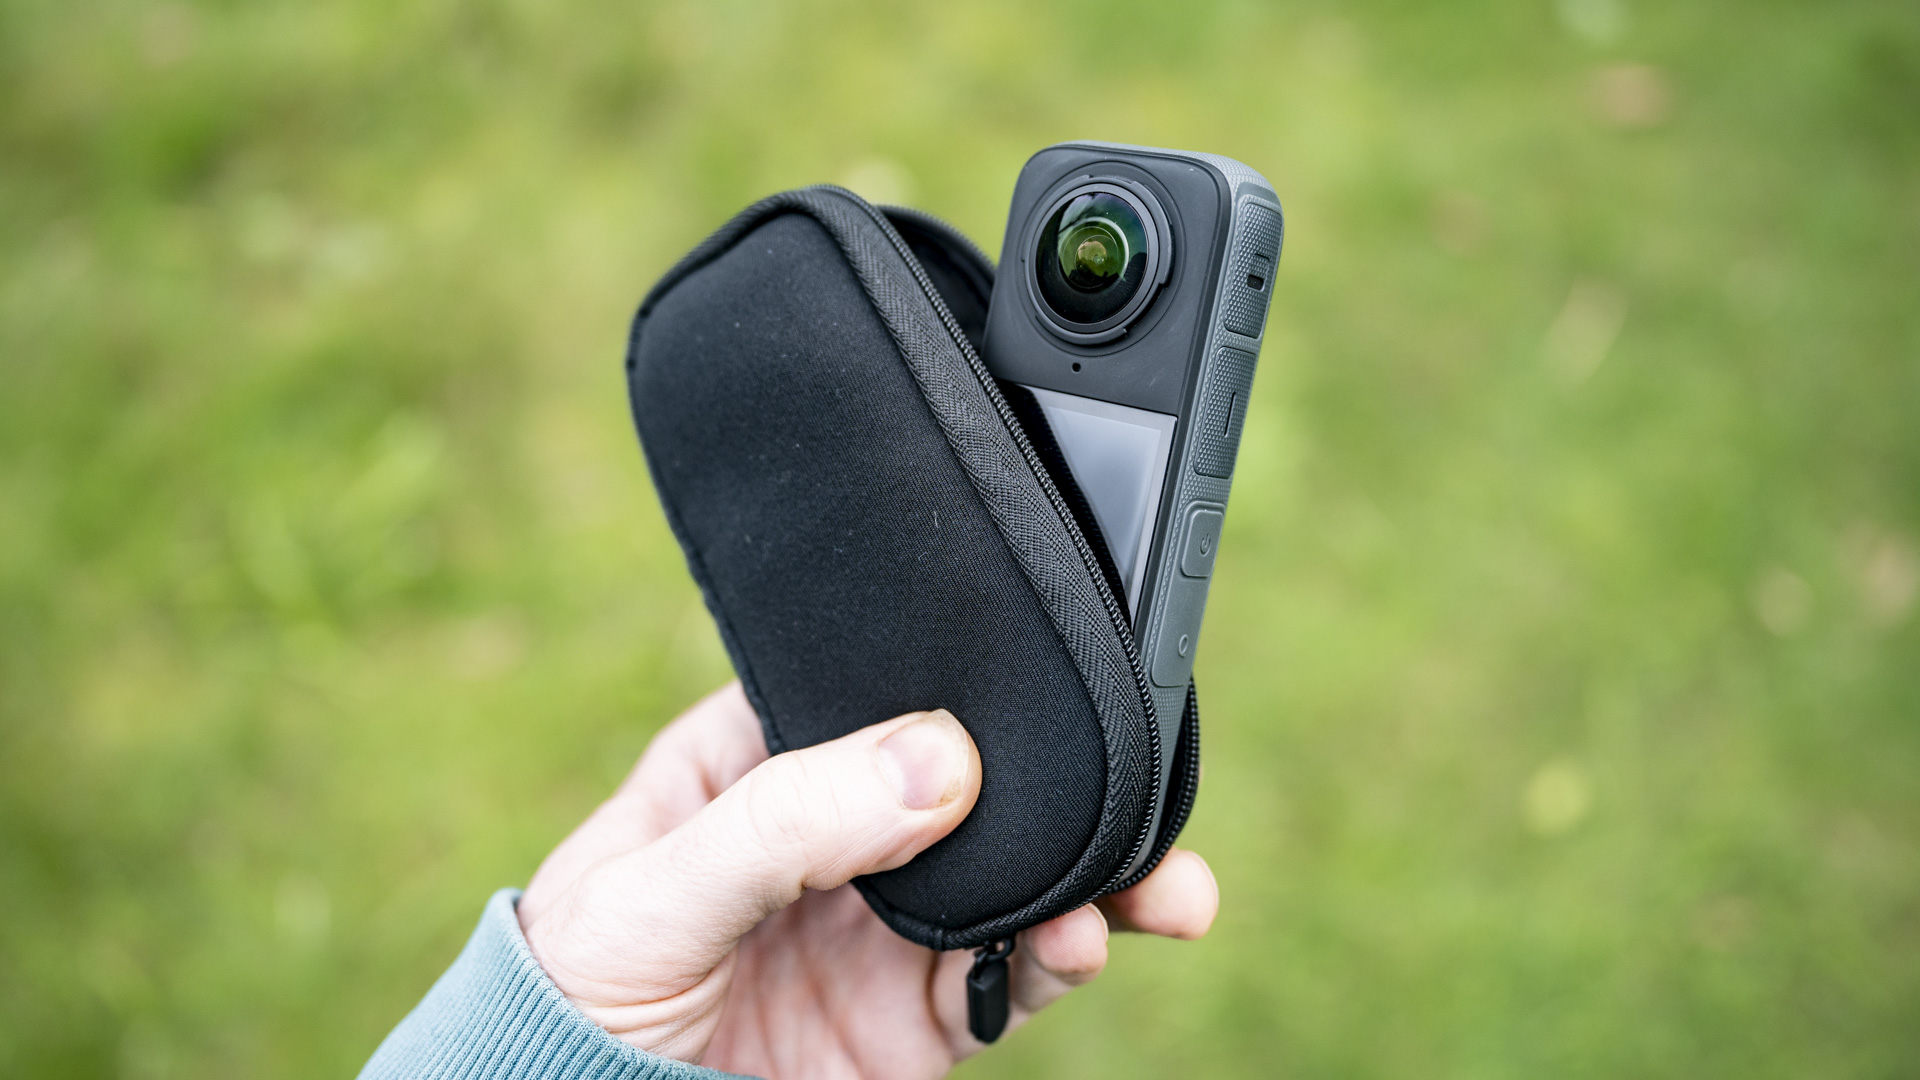 Insta360 X4 360 degree camera emerging from the supplied soft case